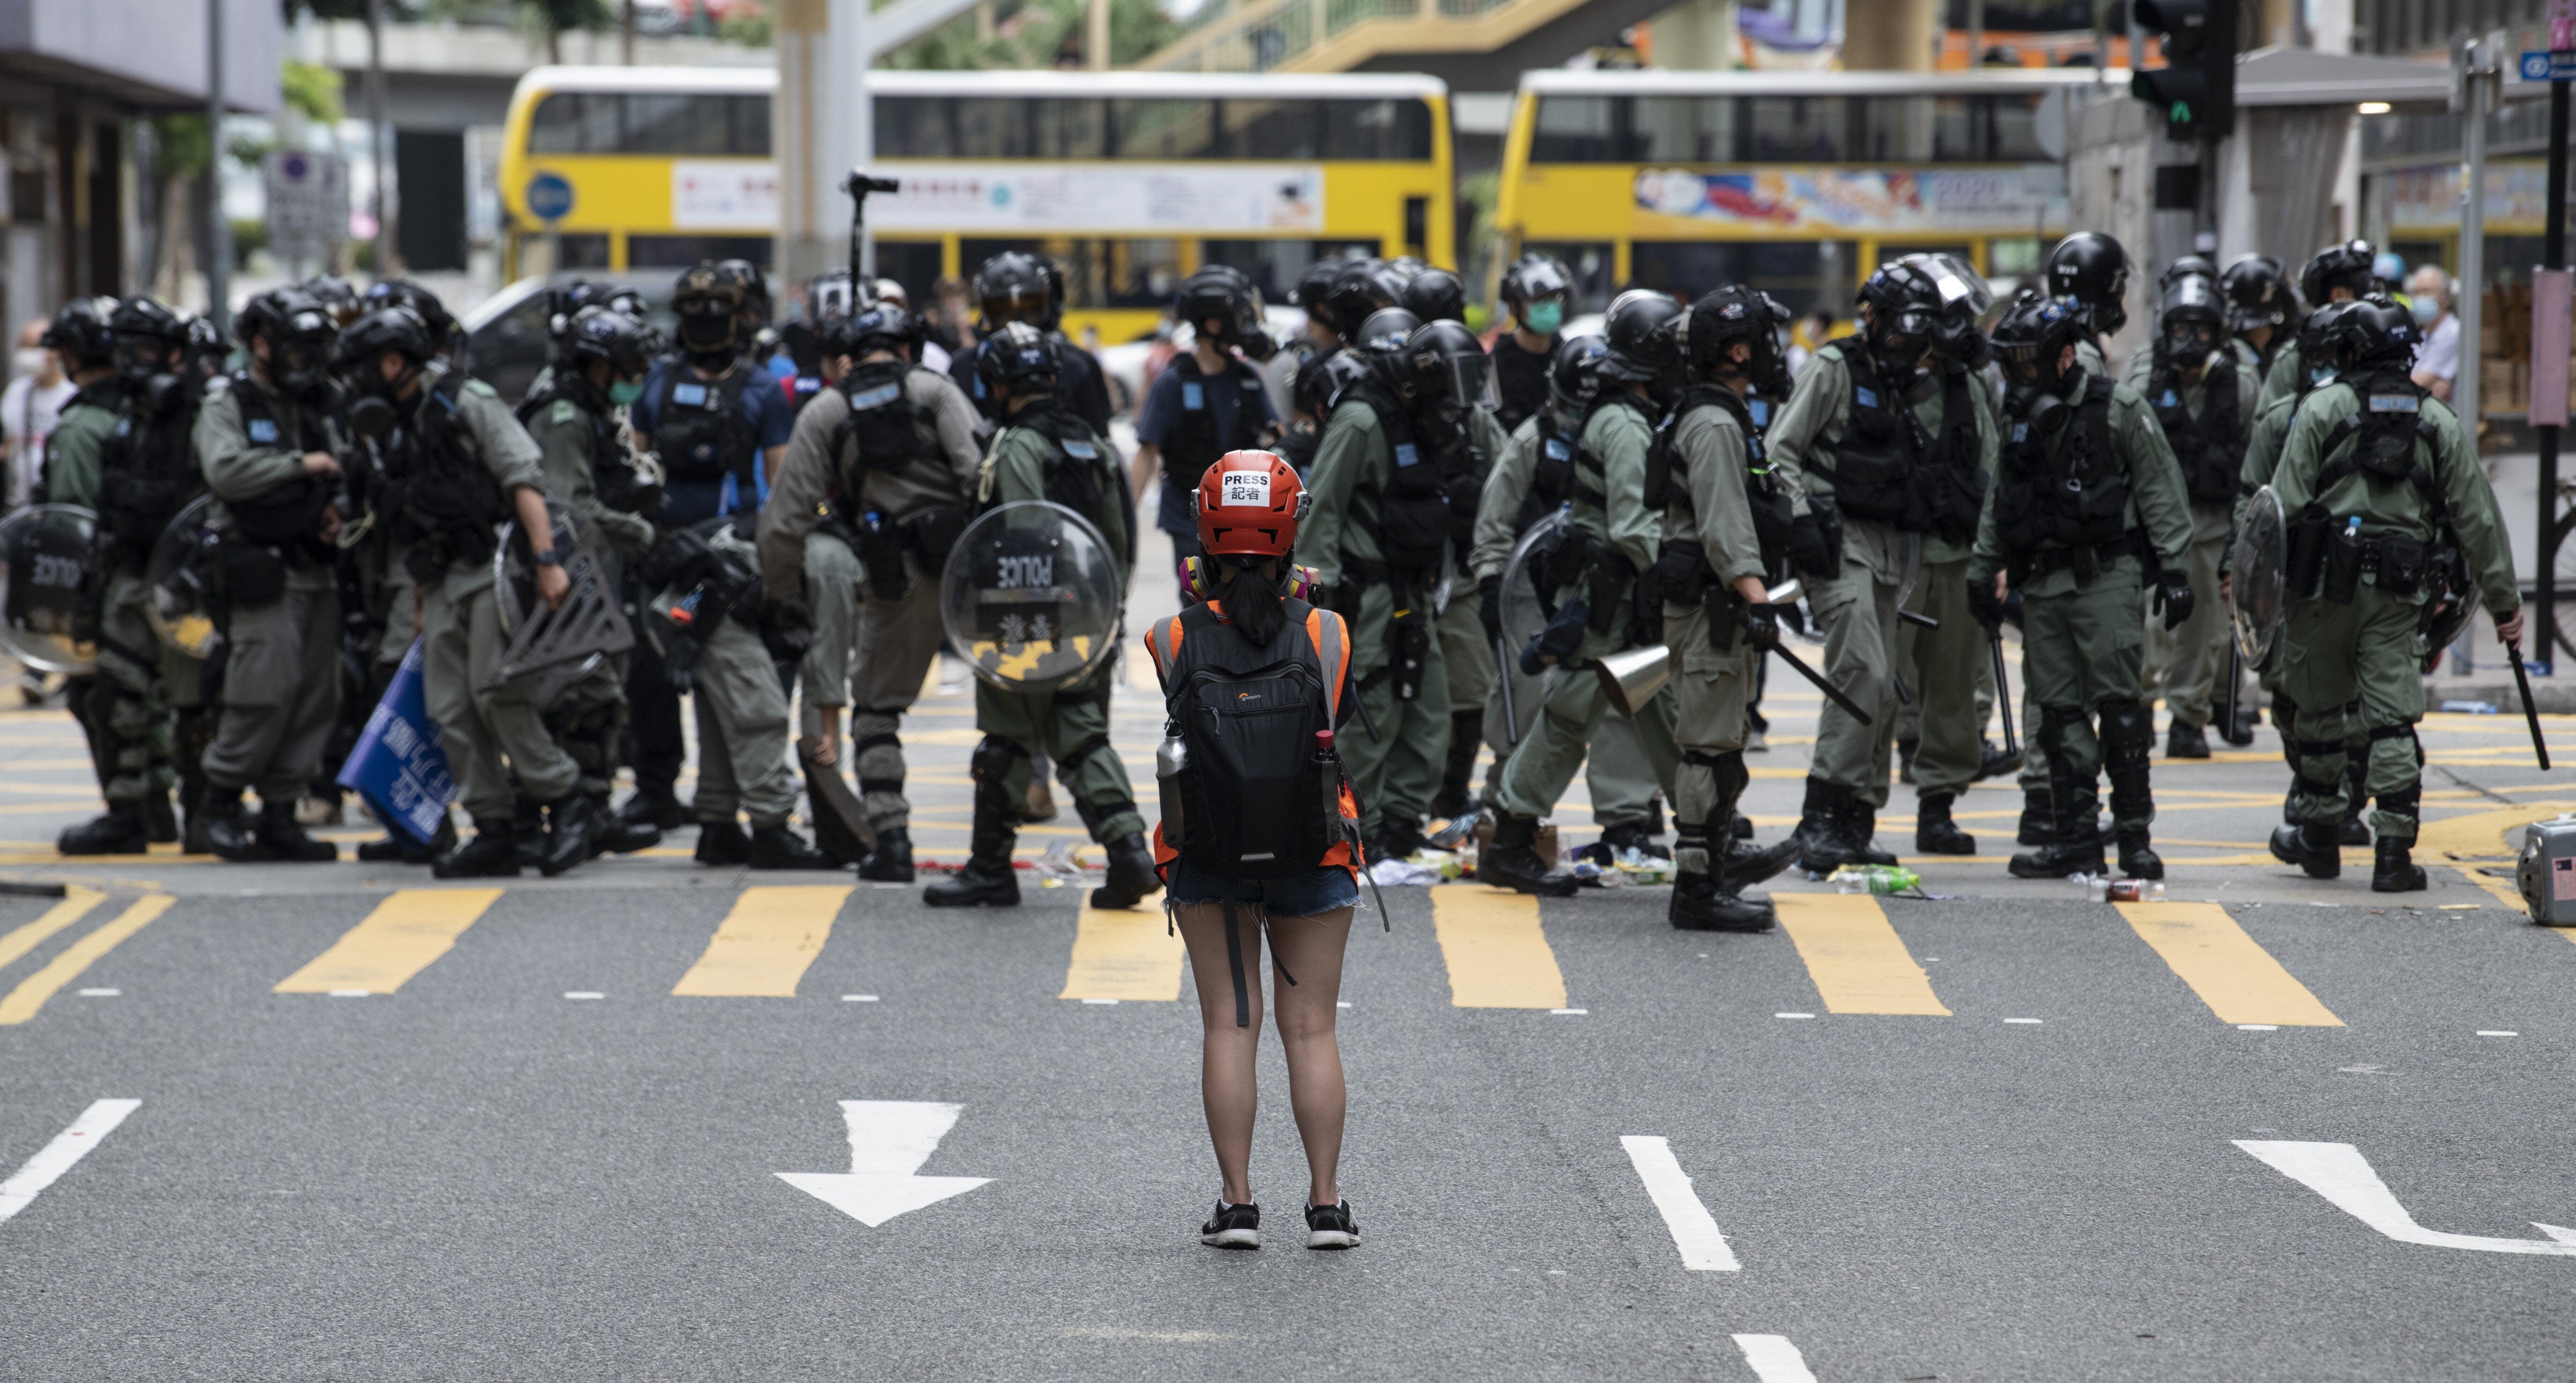 A woman stands in front of police during a protest against Beijing's move to enact a new national security law for Hong Kong, in Causeway Bay on May 24. Photo: DPA